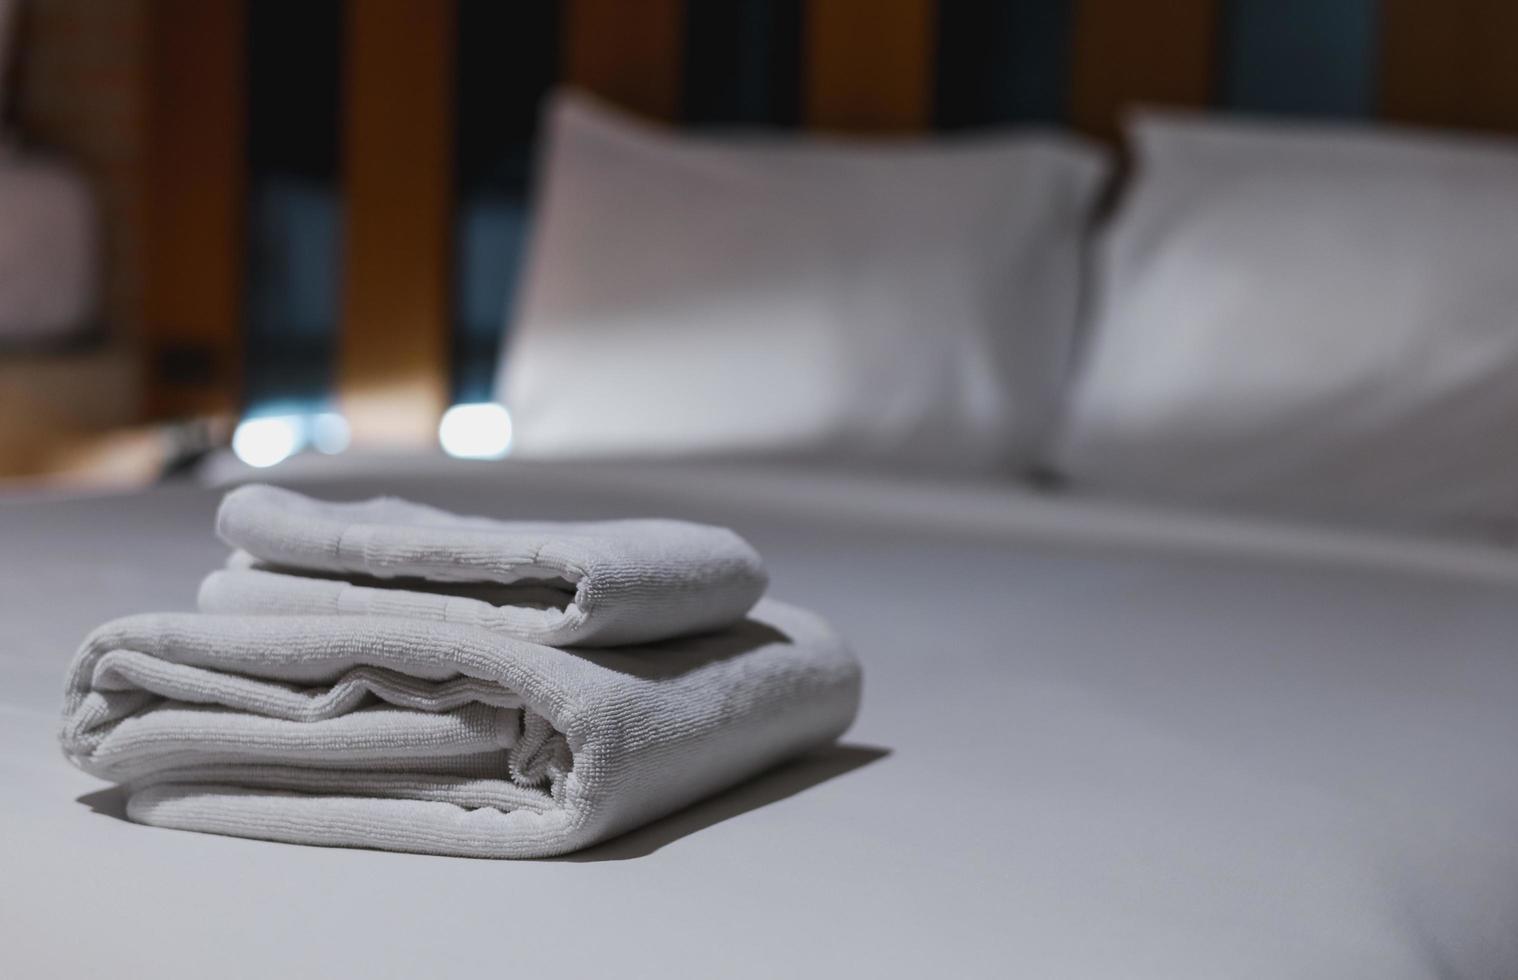 The towels are folded and placed on the bed for the hotel guests. photo